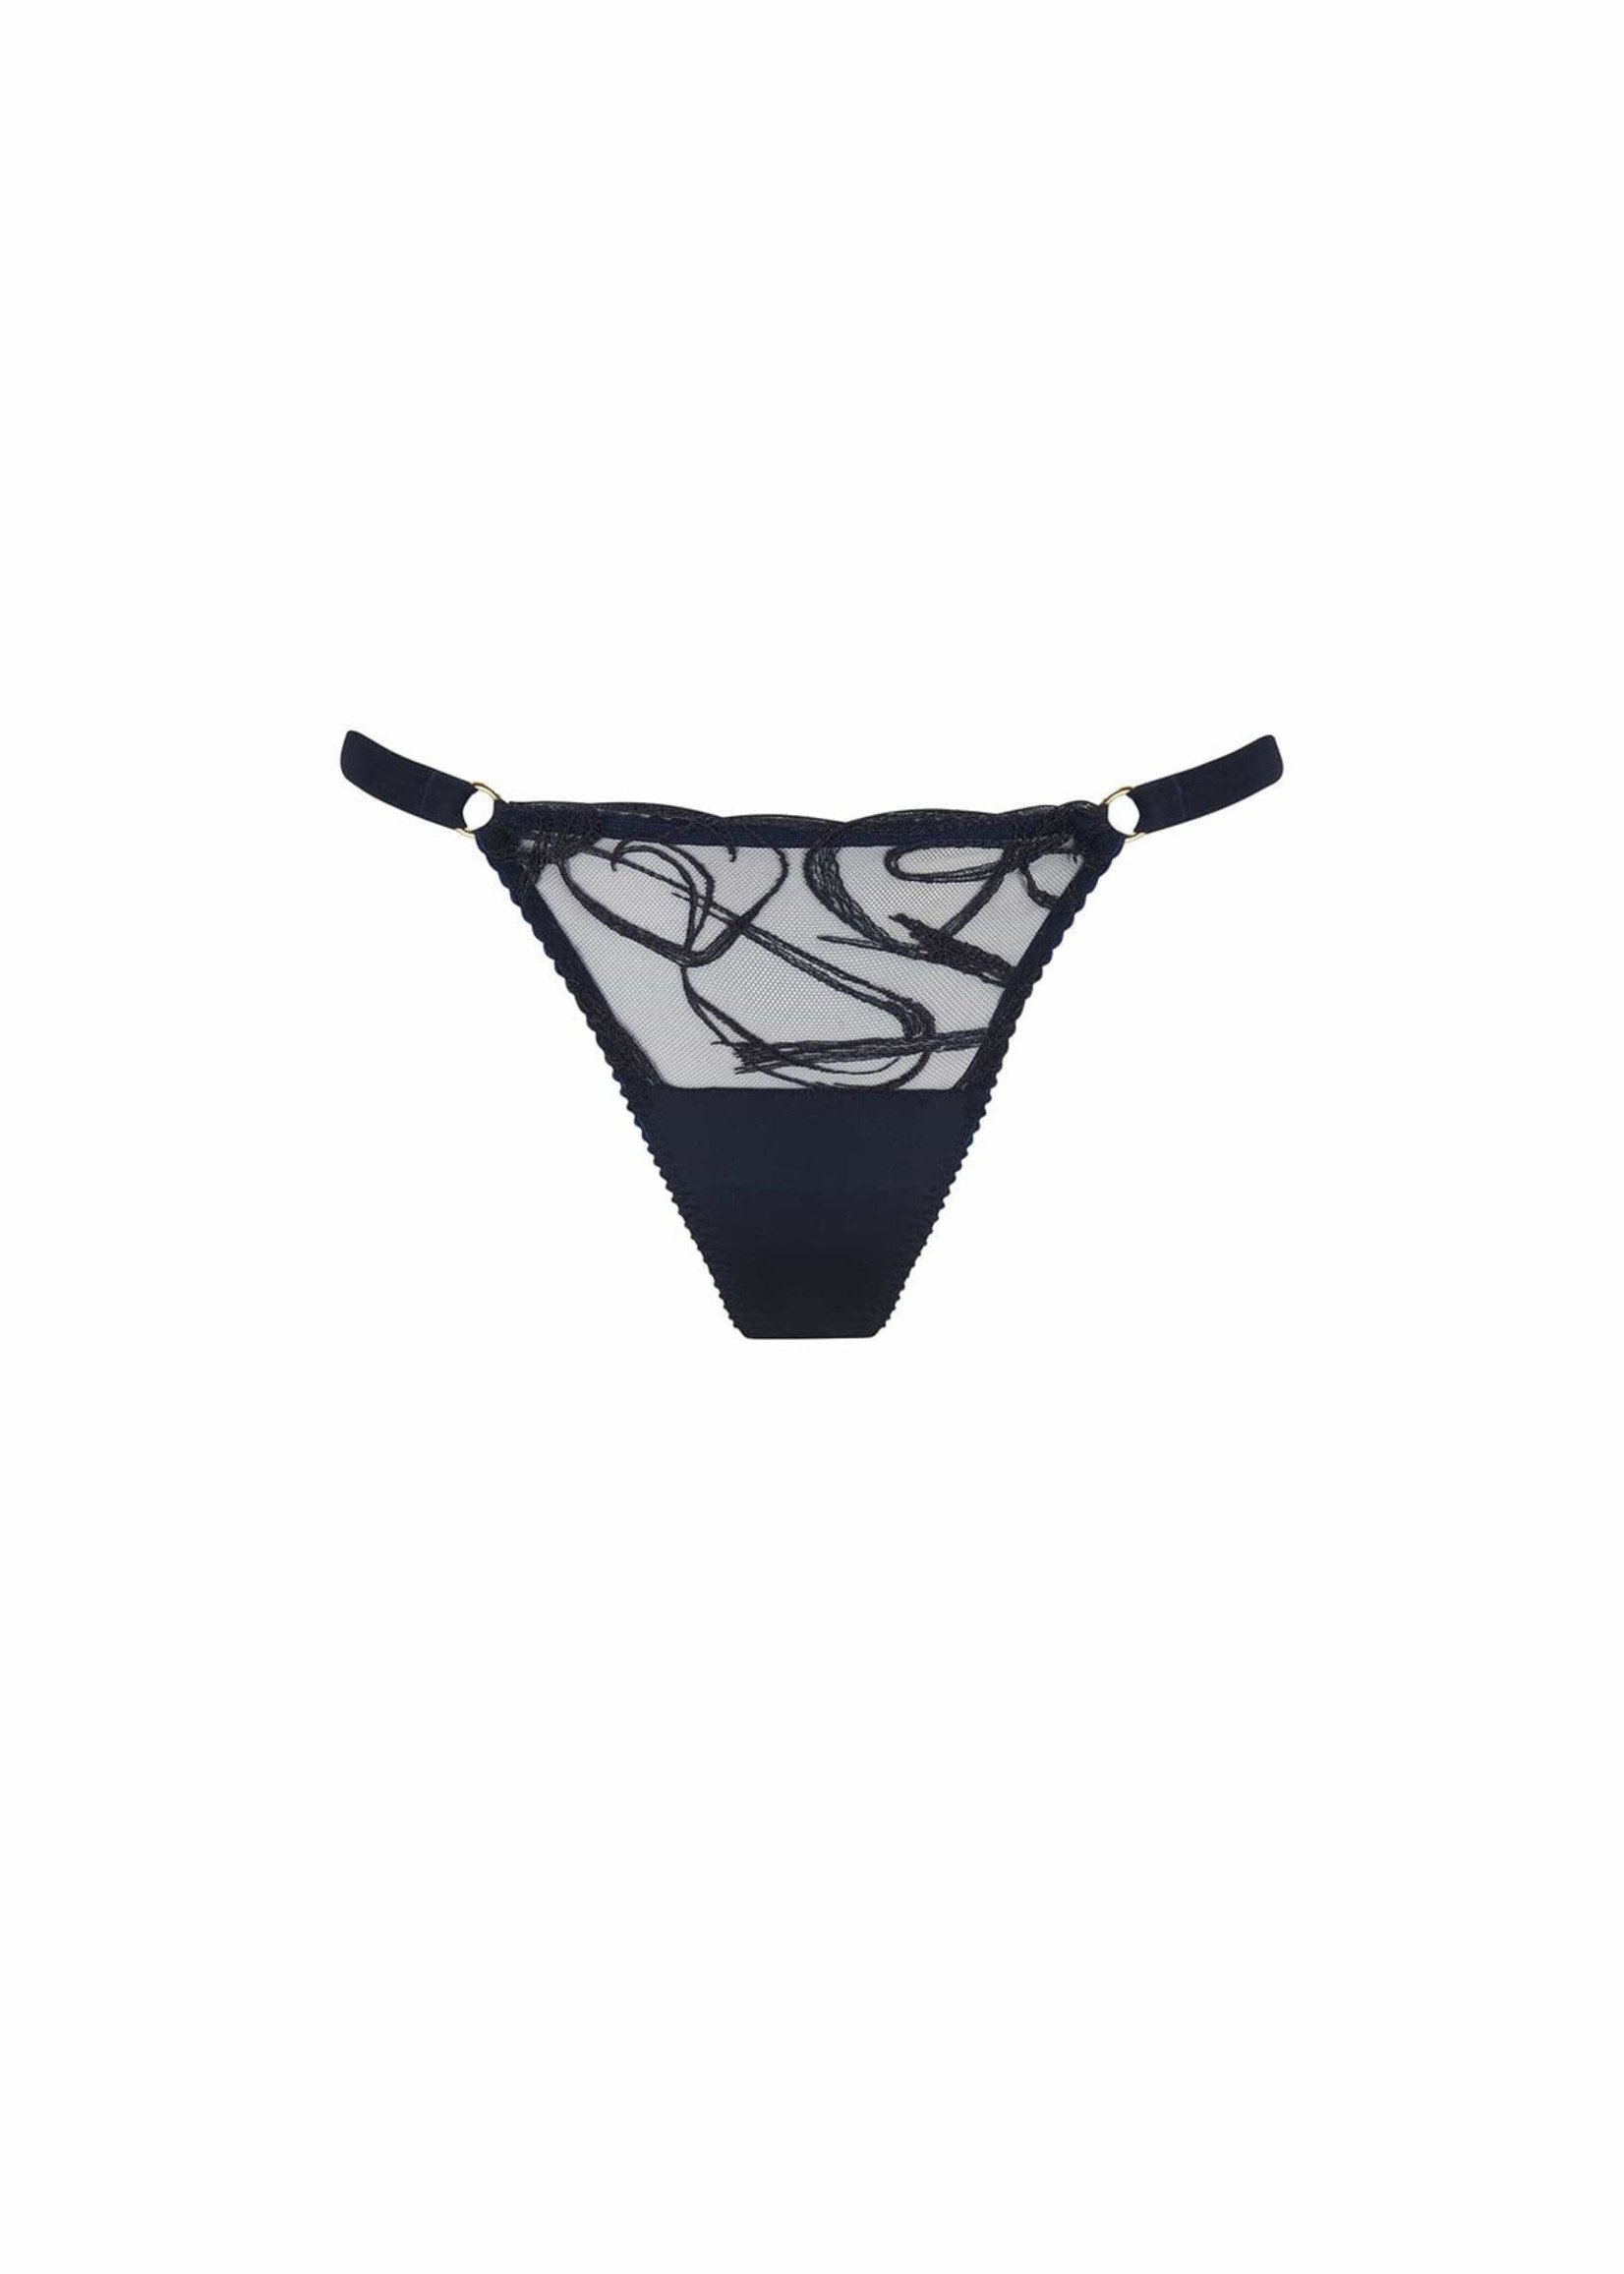 Silk and Lace G-String